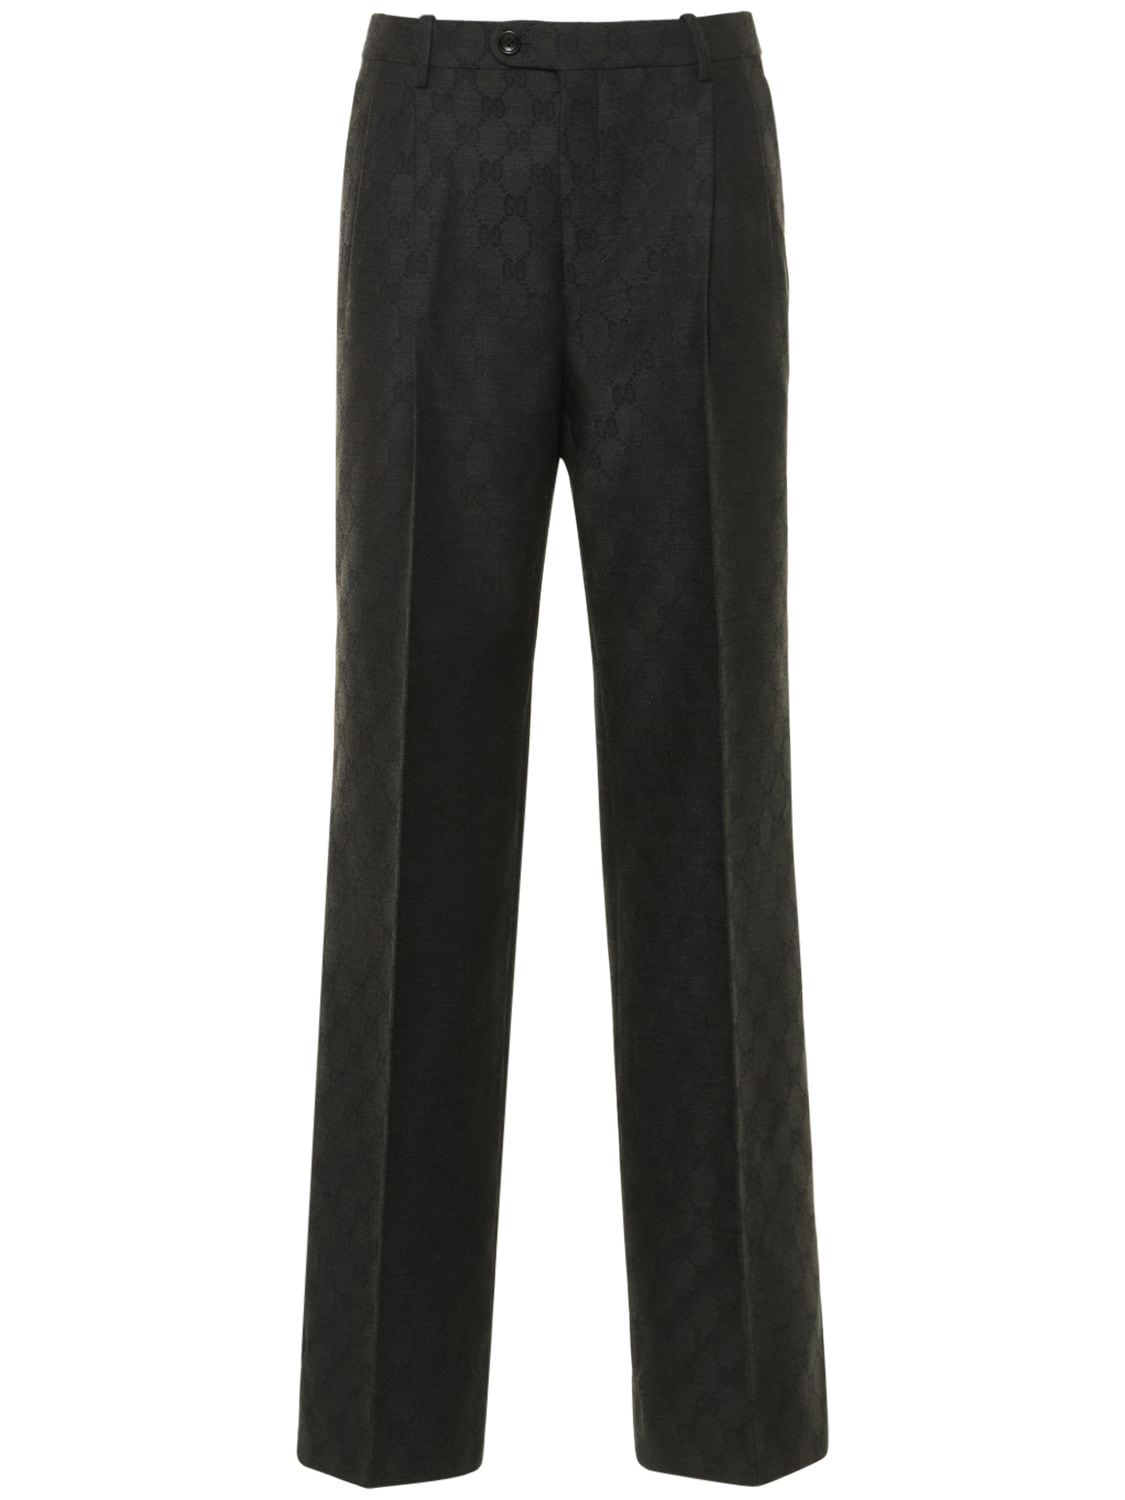 Women's GUCCI Pants On Sale, Up To 70% Off | ModeSens